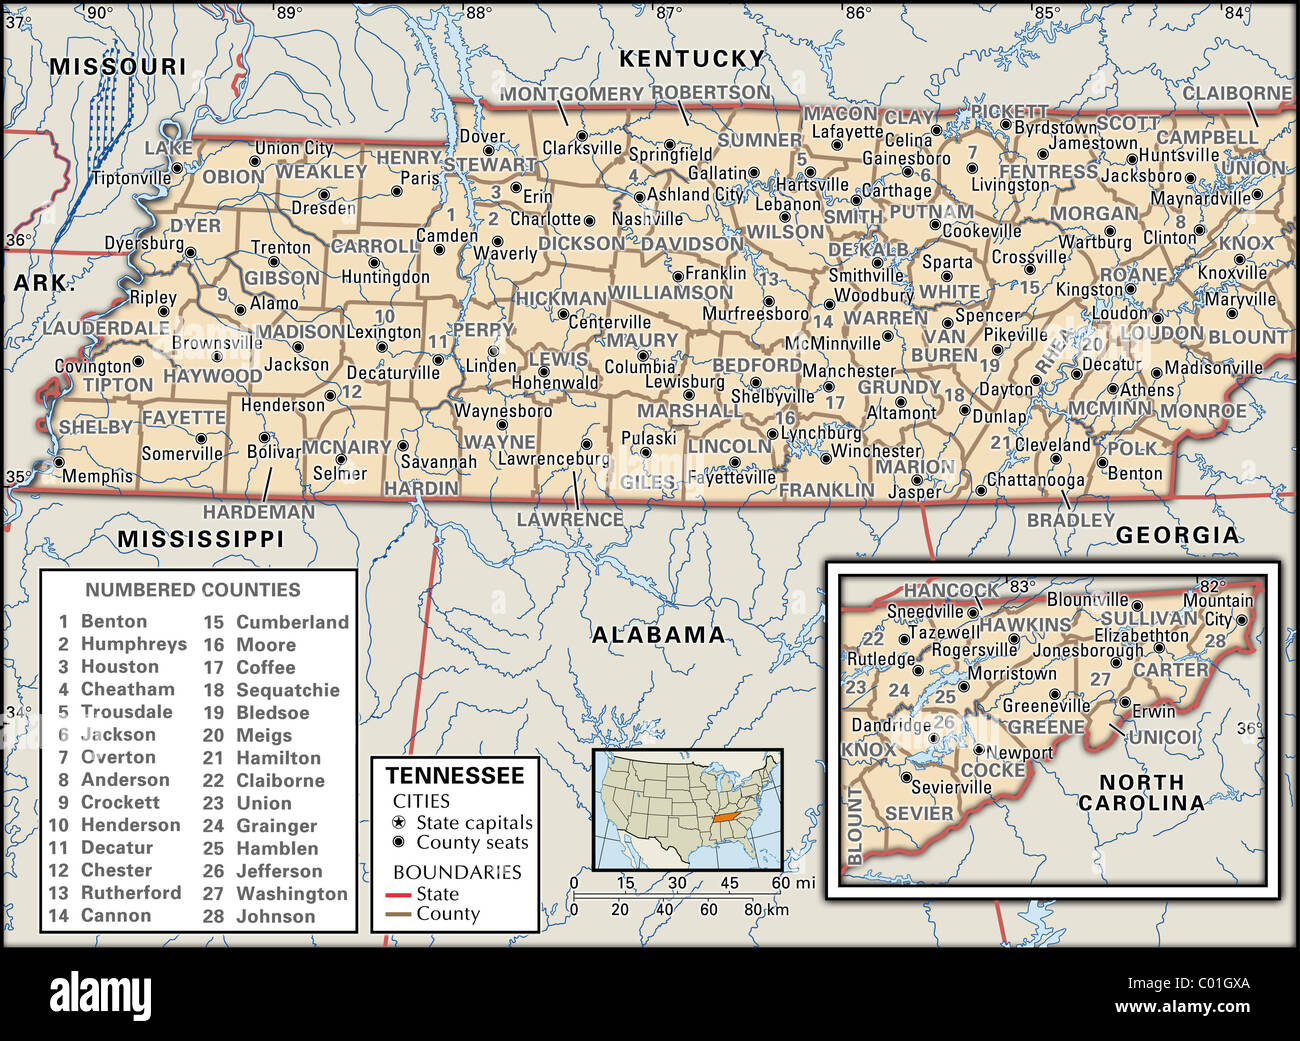 Political map of Tennessee Stock Photo - Alamy